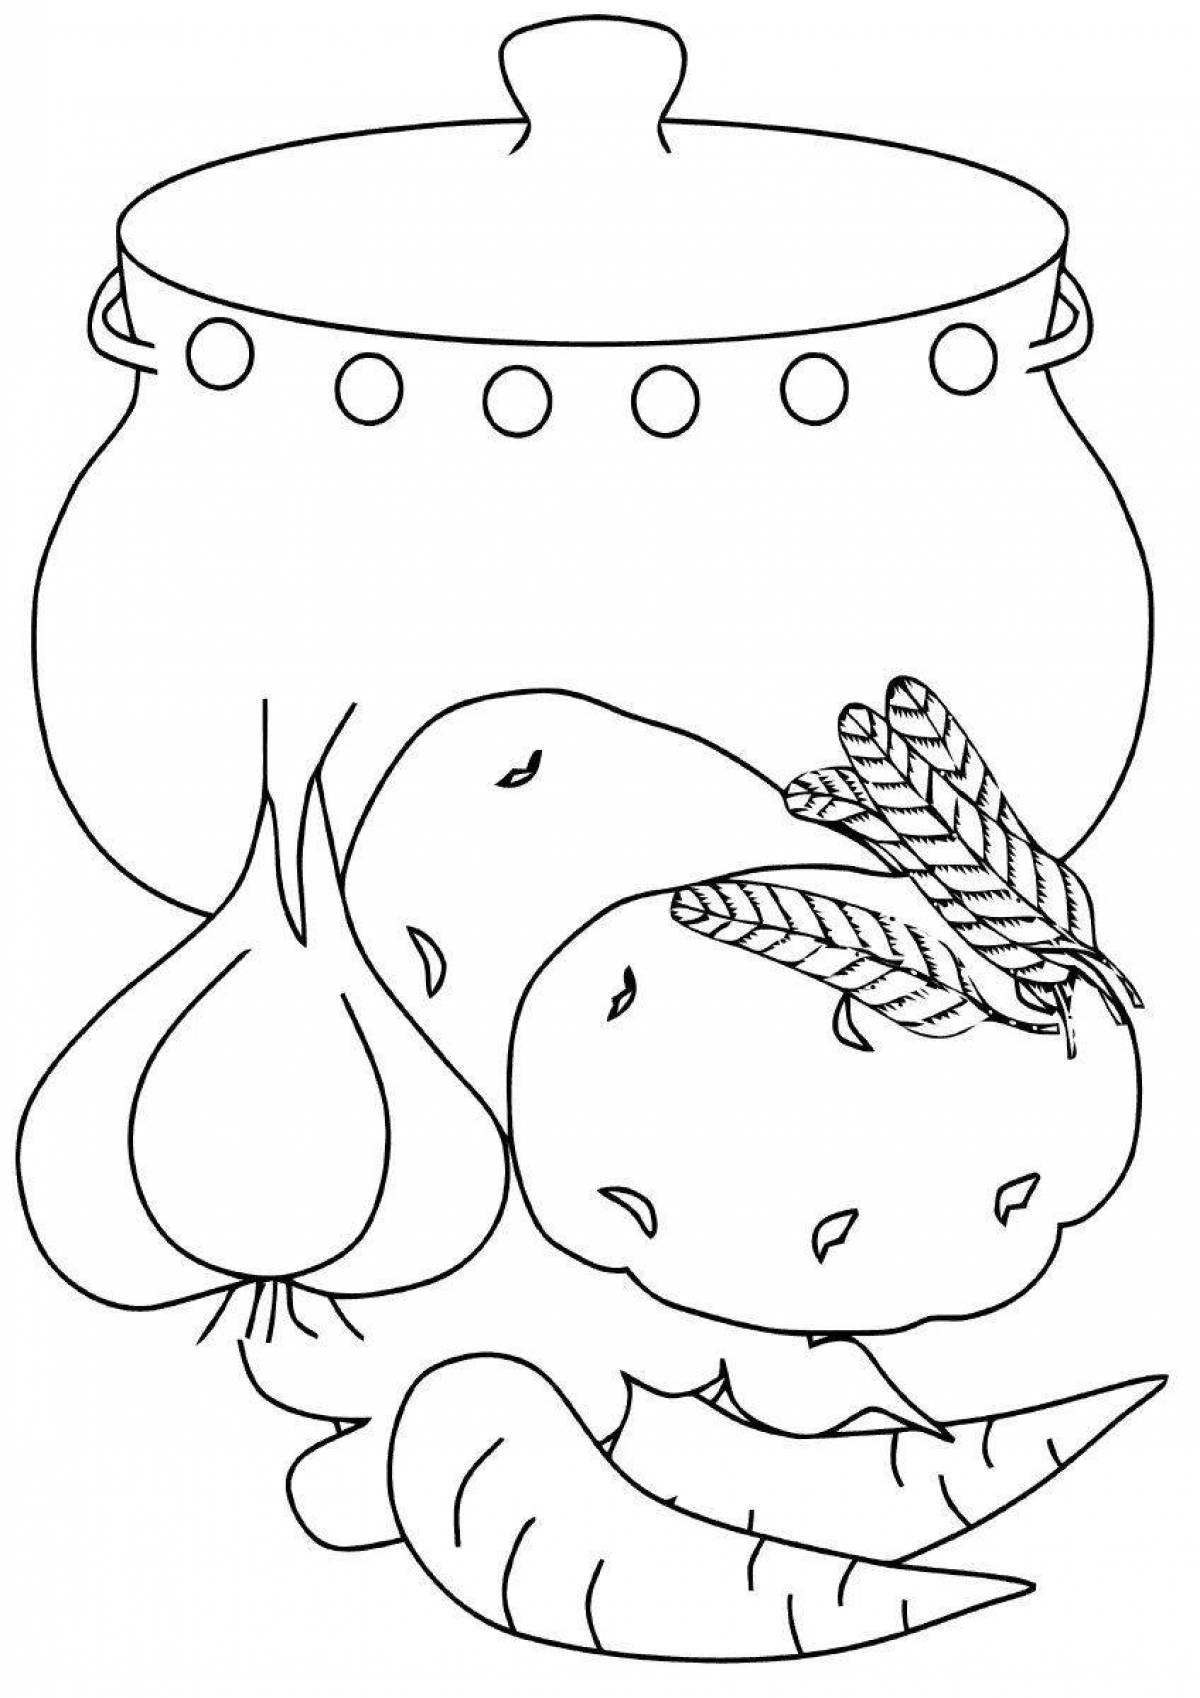 Coloring page stimulating borscht